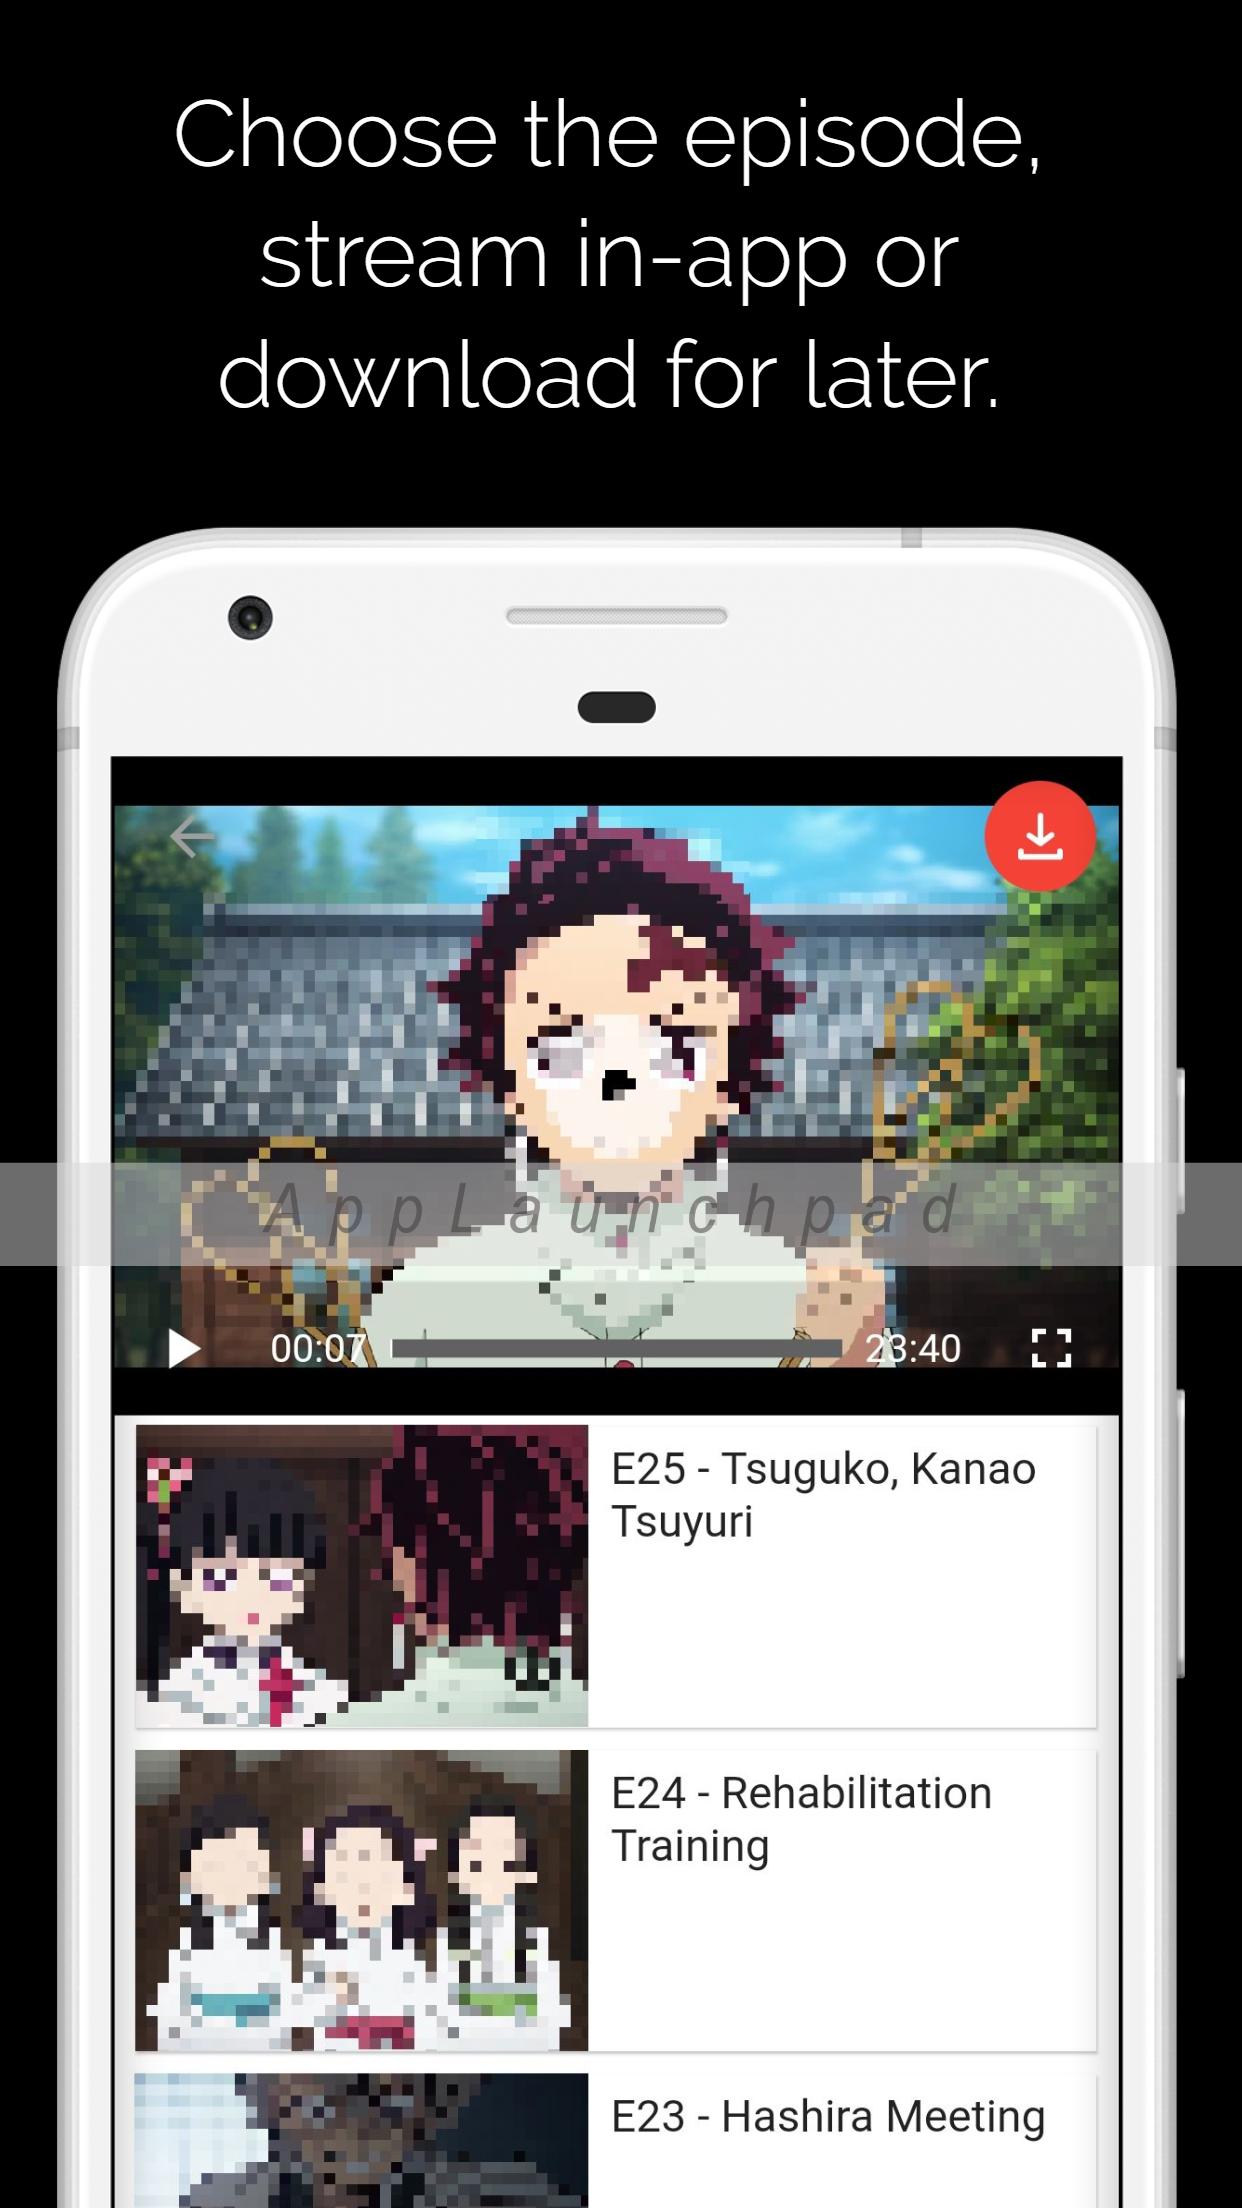 Anime Hero App Watch Or Download Sub Or Dub Anime For Android Apk Download